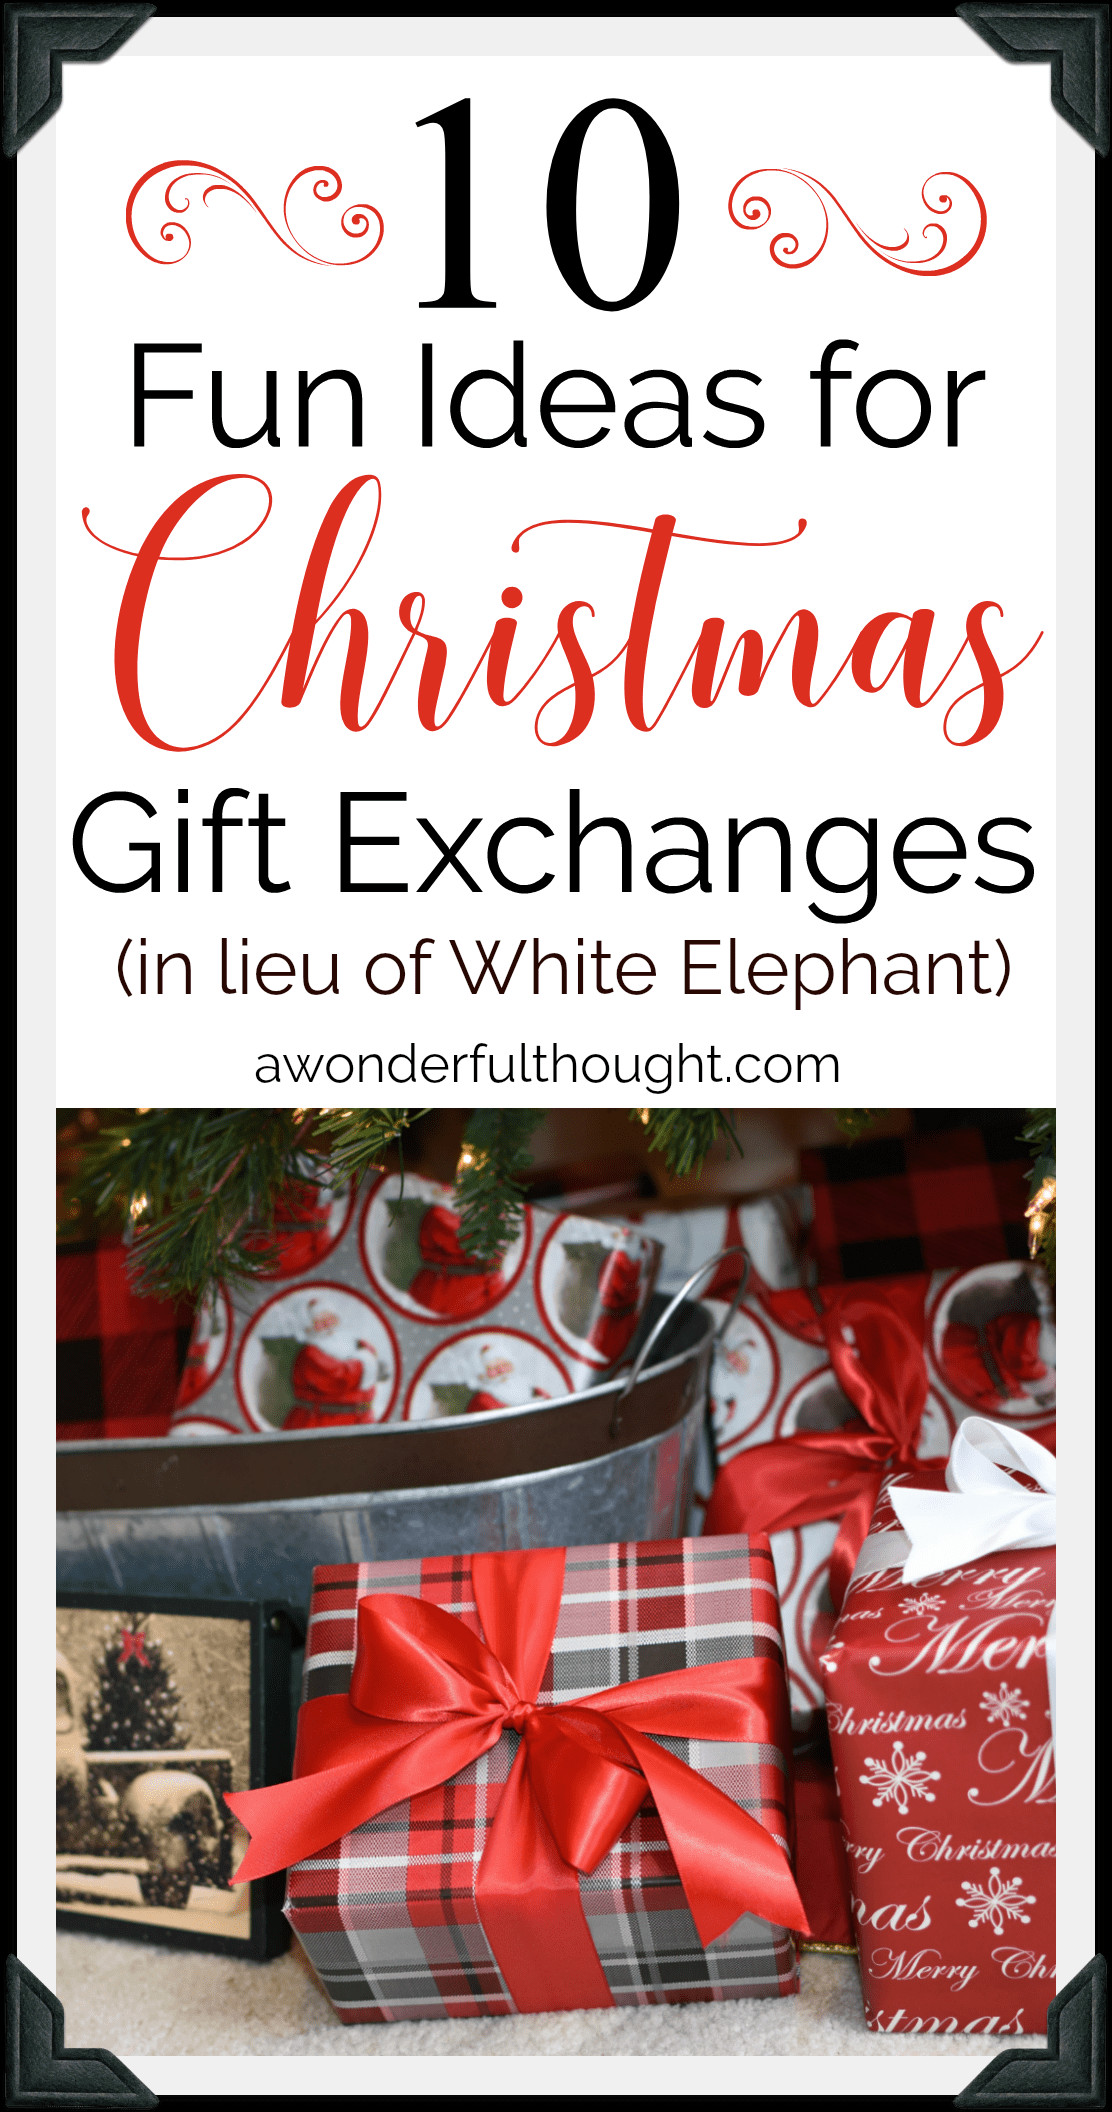 Gift Exchange Ideas For Christmas
 Christmas Gift Exchange Ideas A Wonderful Thought